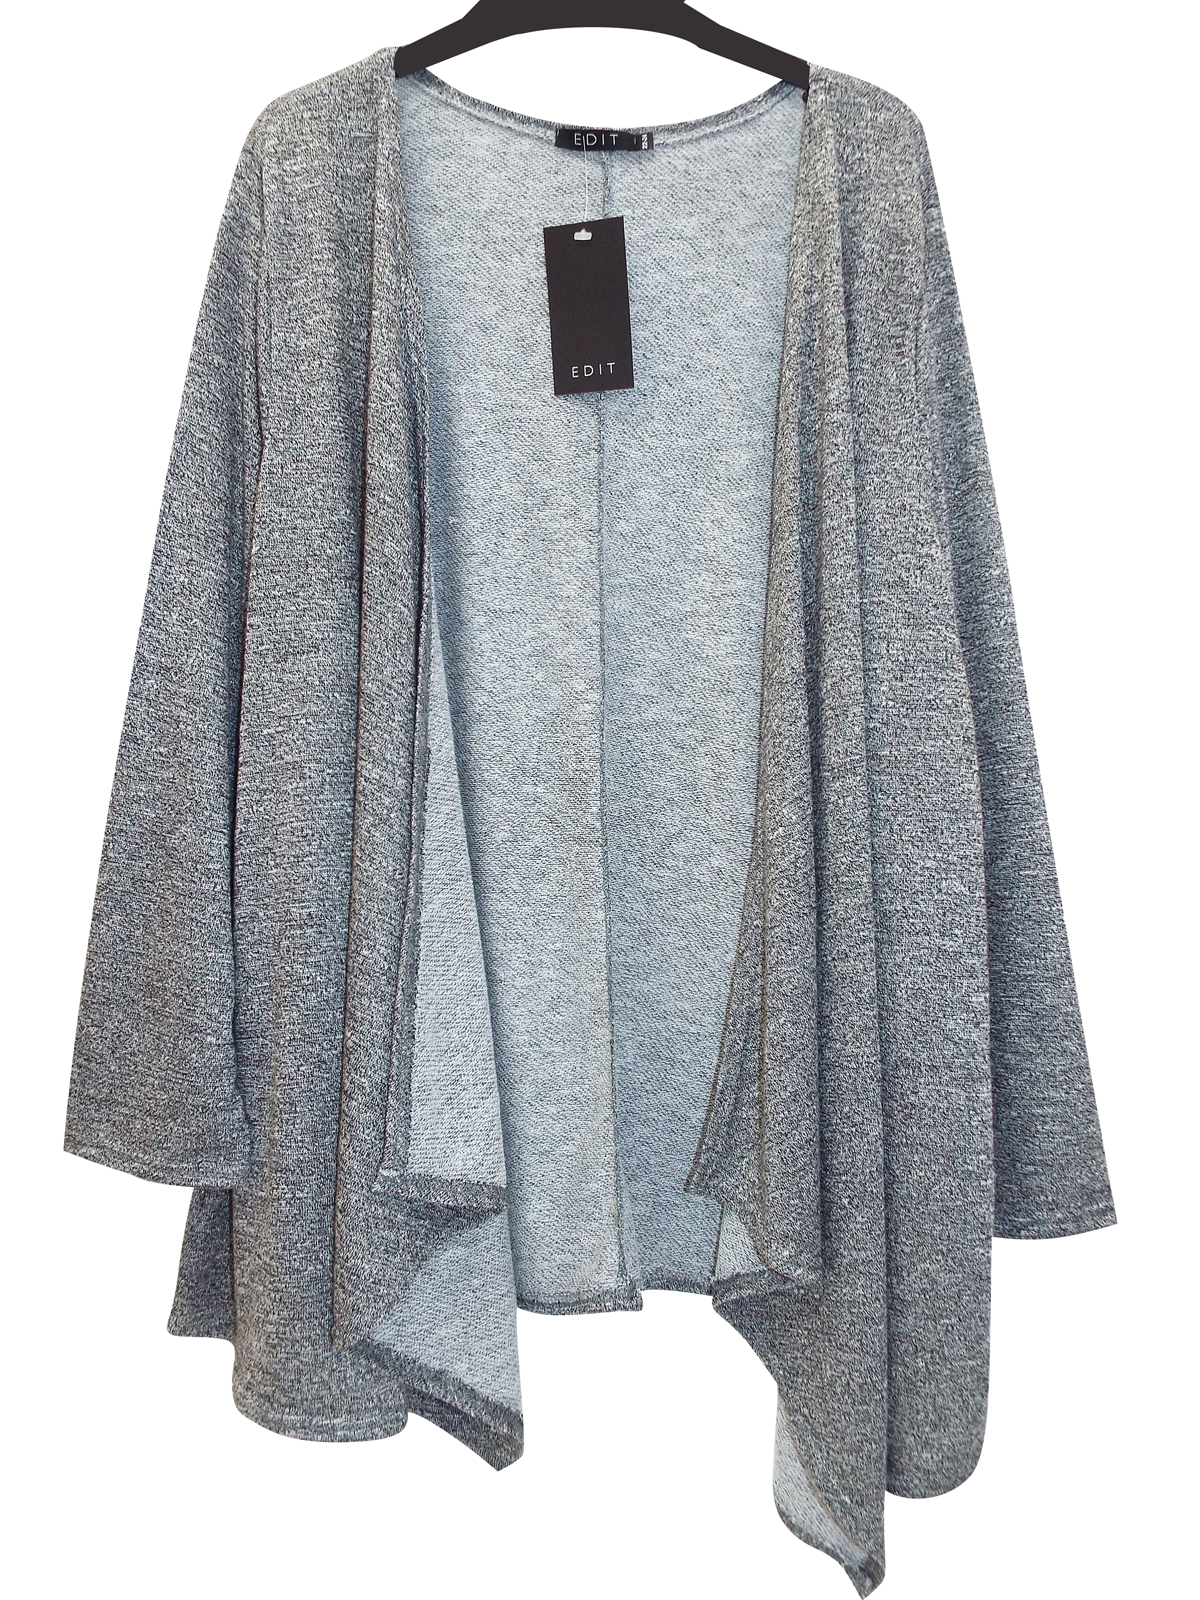 Edit - - Edit GREY Open Front Waterfall Cardigan - Plus Size 18 to 30/32